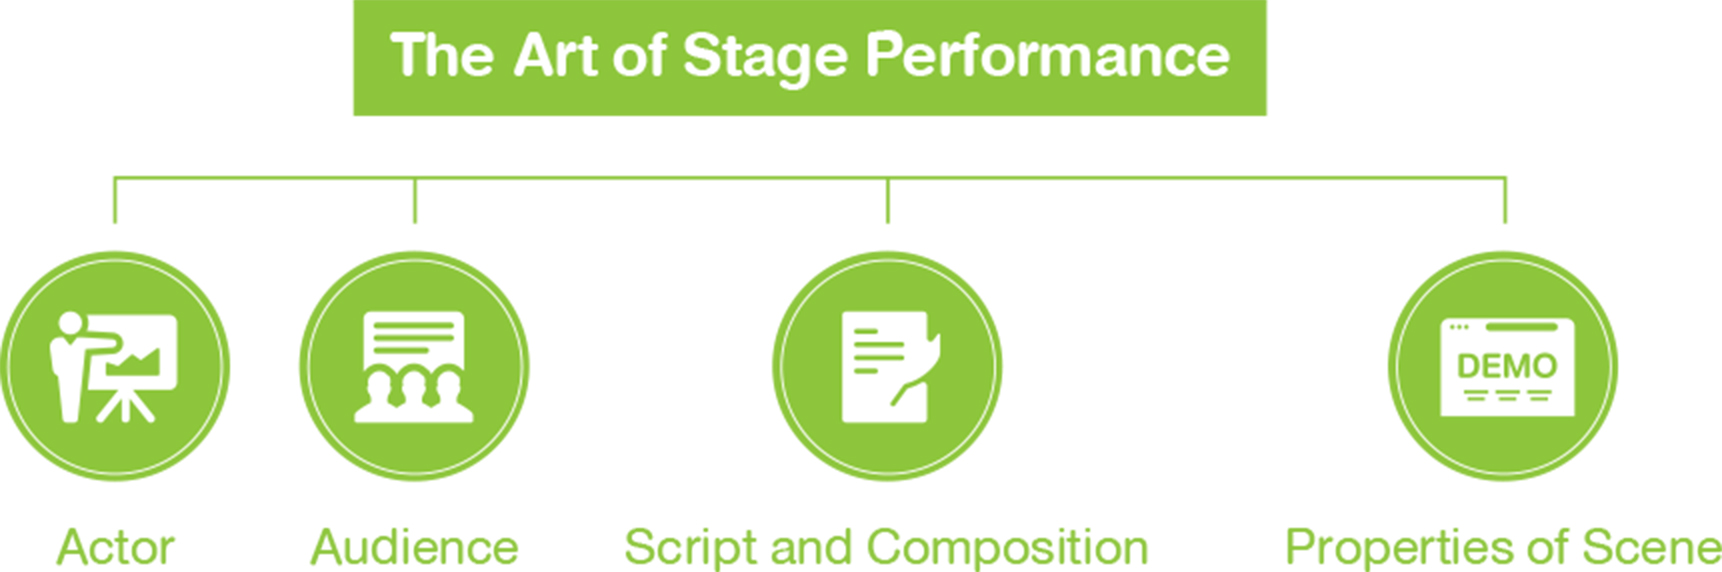 The Art of Stage Performance - Startup Thailand Focus